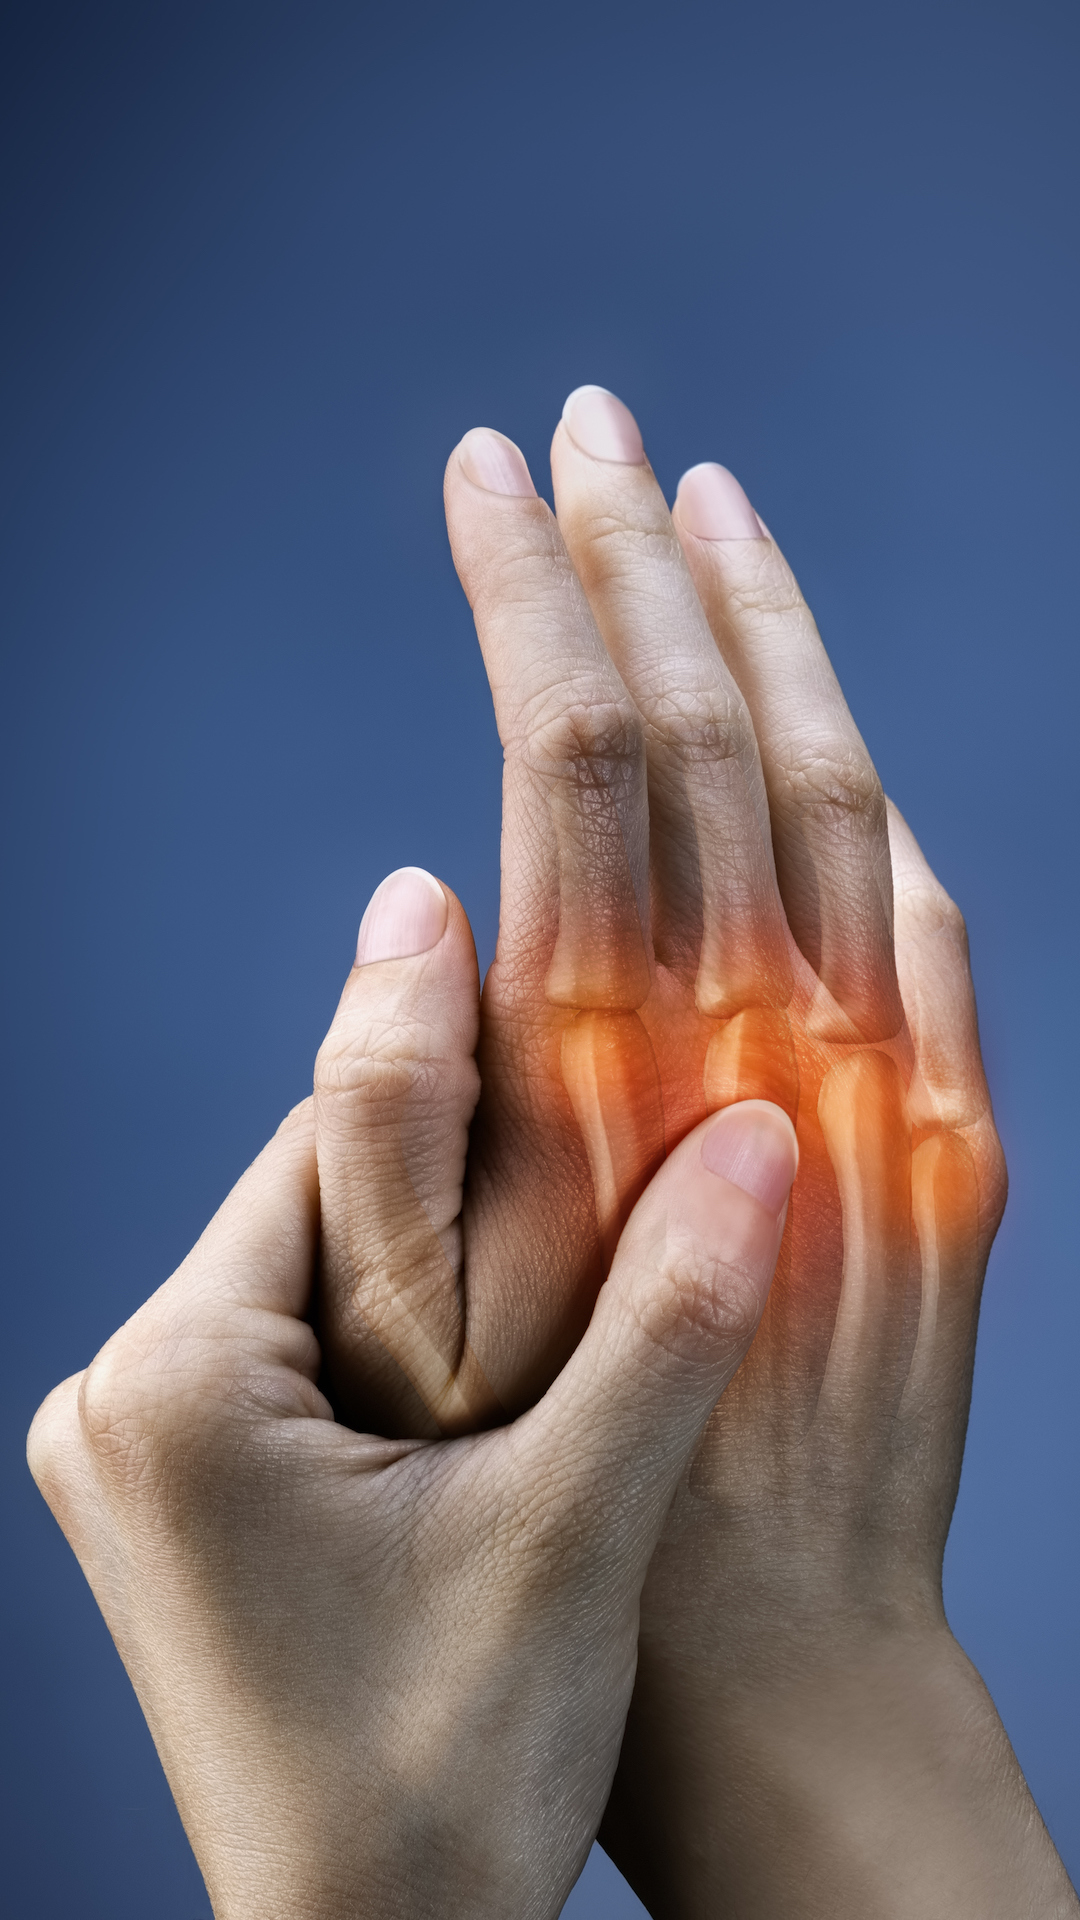 Arthritis in the Fingers and Knuckles: Pictures and Symptoms